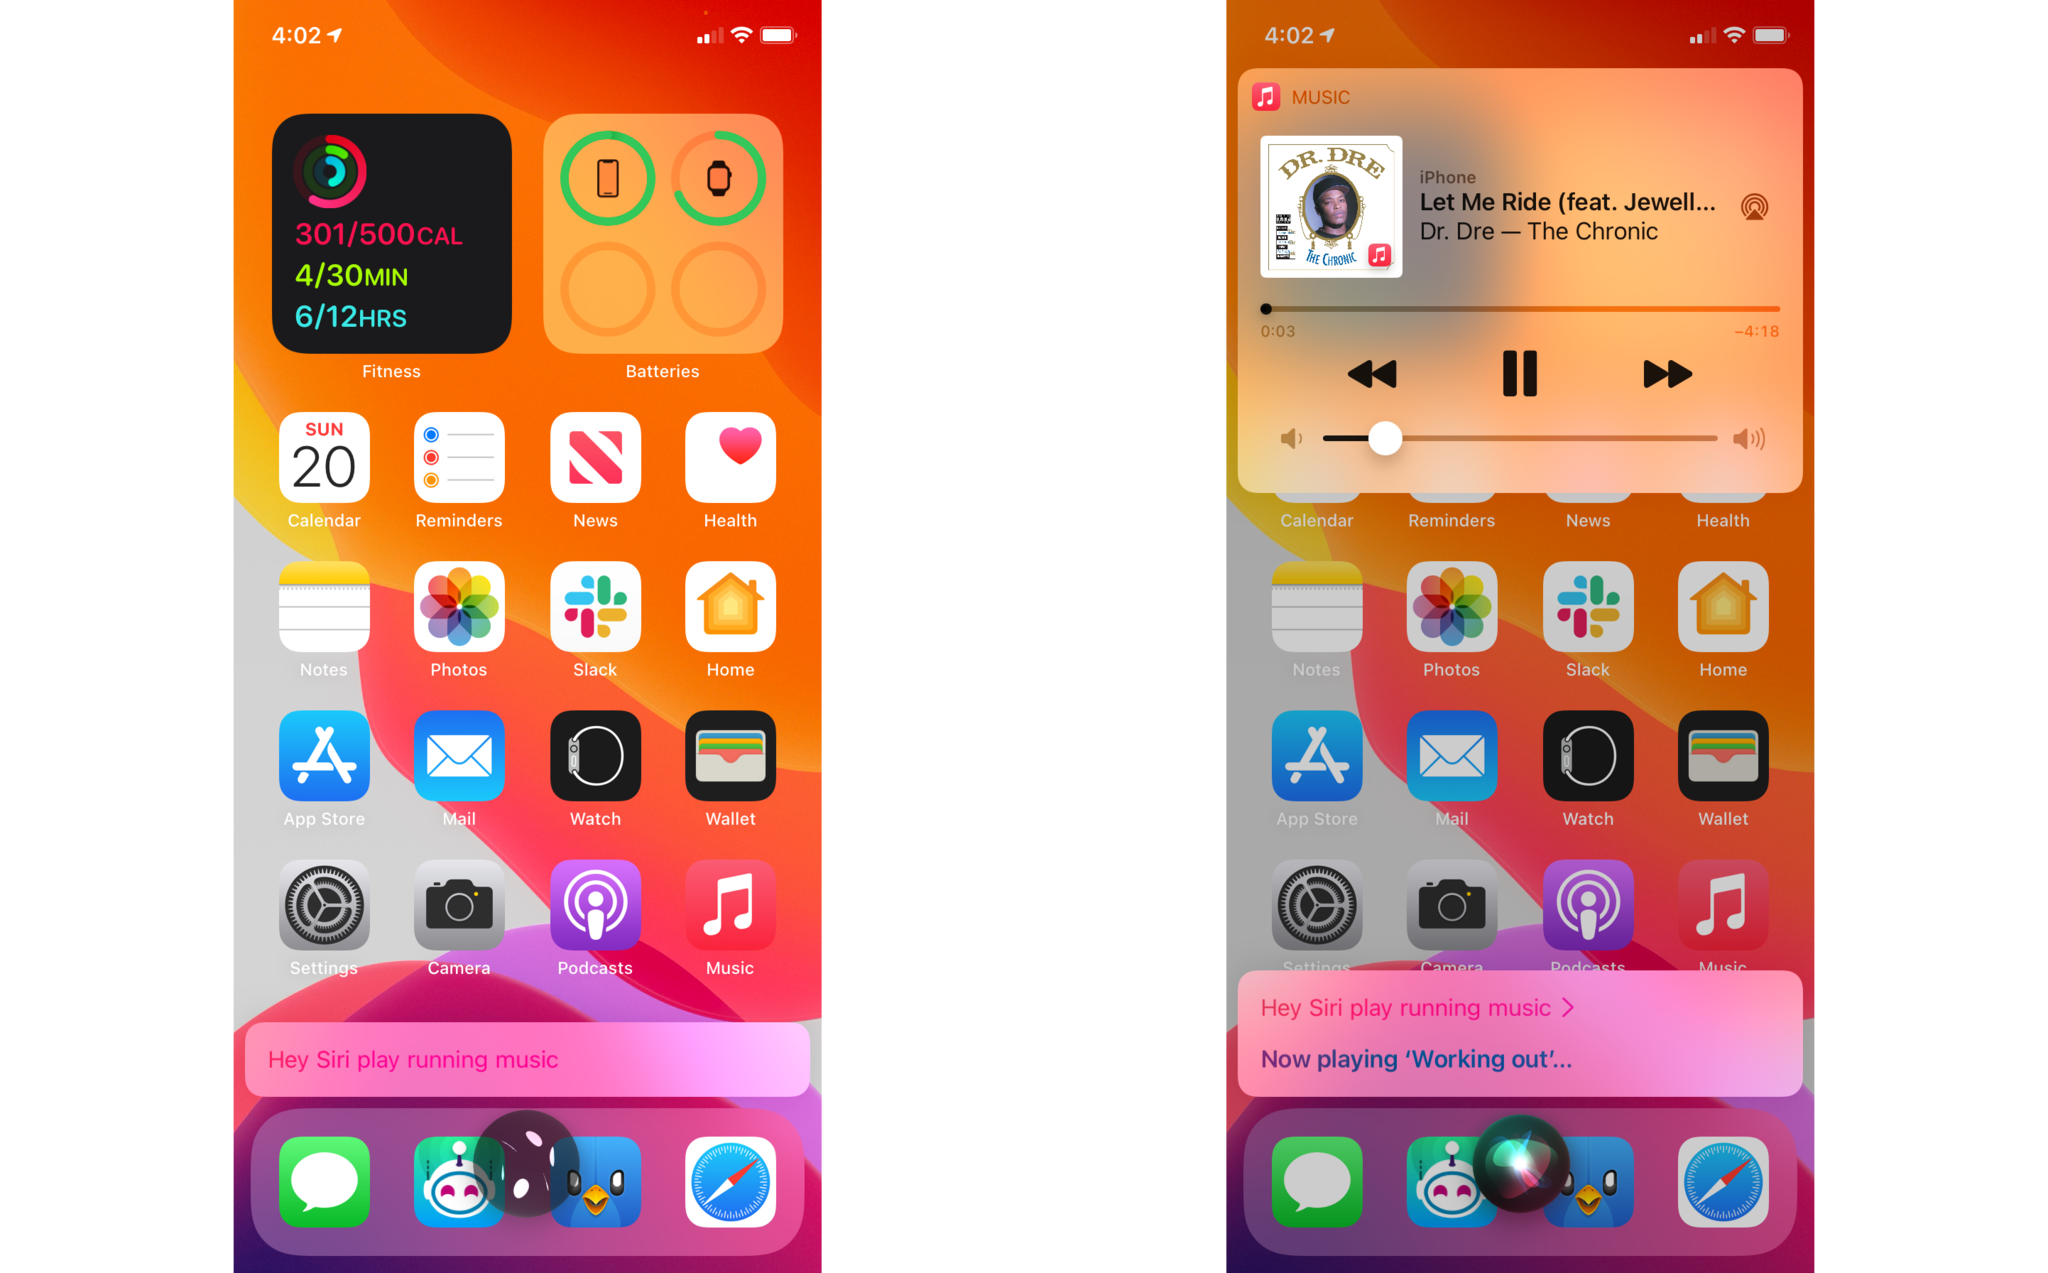 How to use Siri to find and listen to music on HomePod and HomePod mini by showing steps on an iPhone: Give a command like "Hey Siri, play running music"